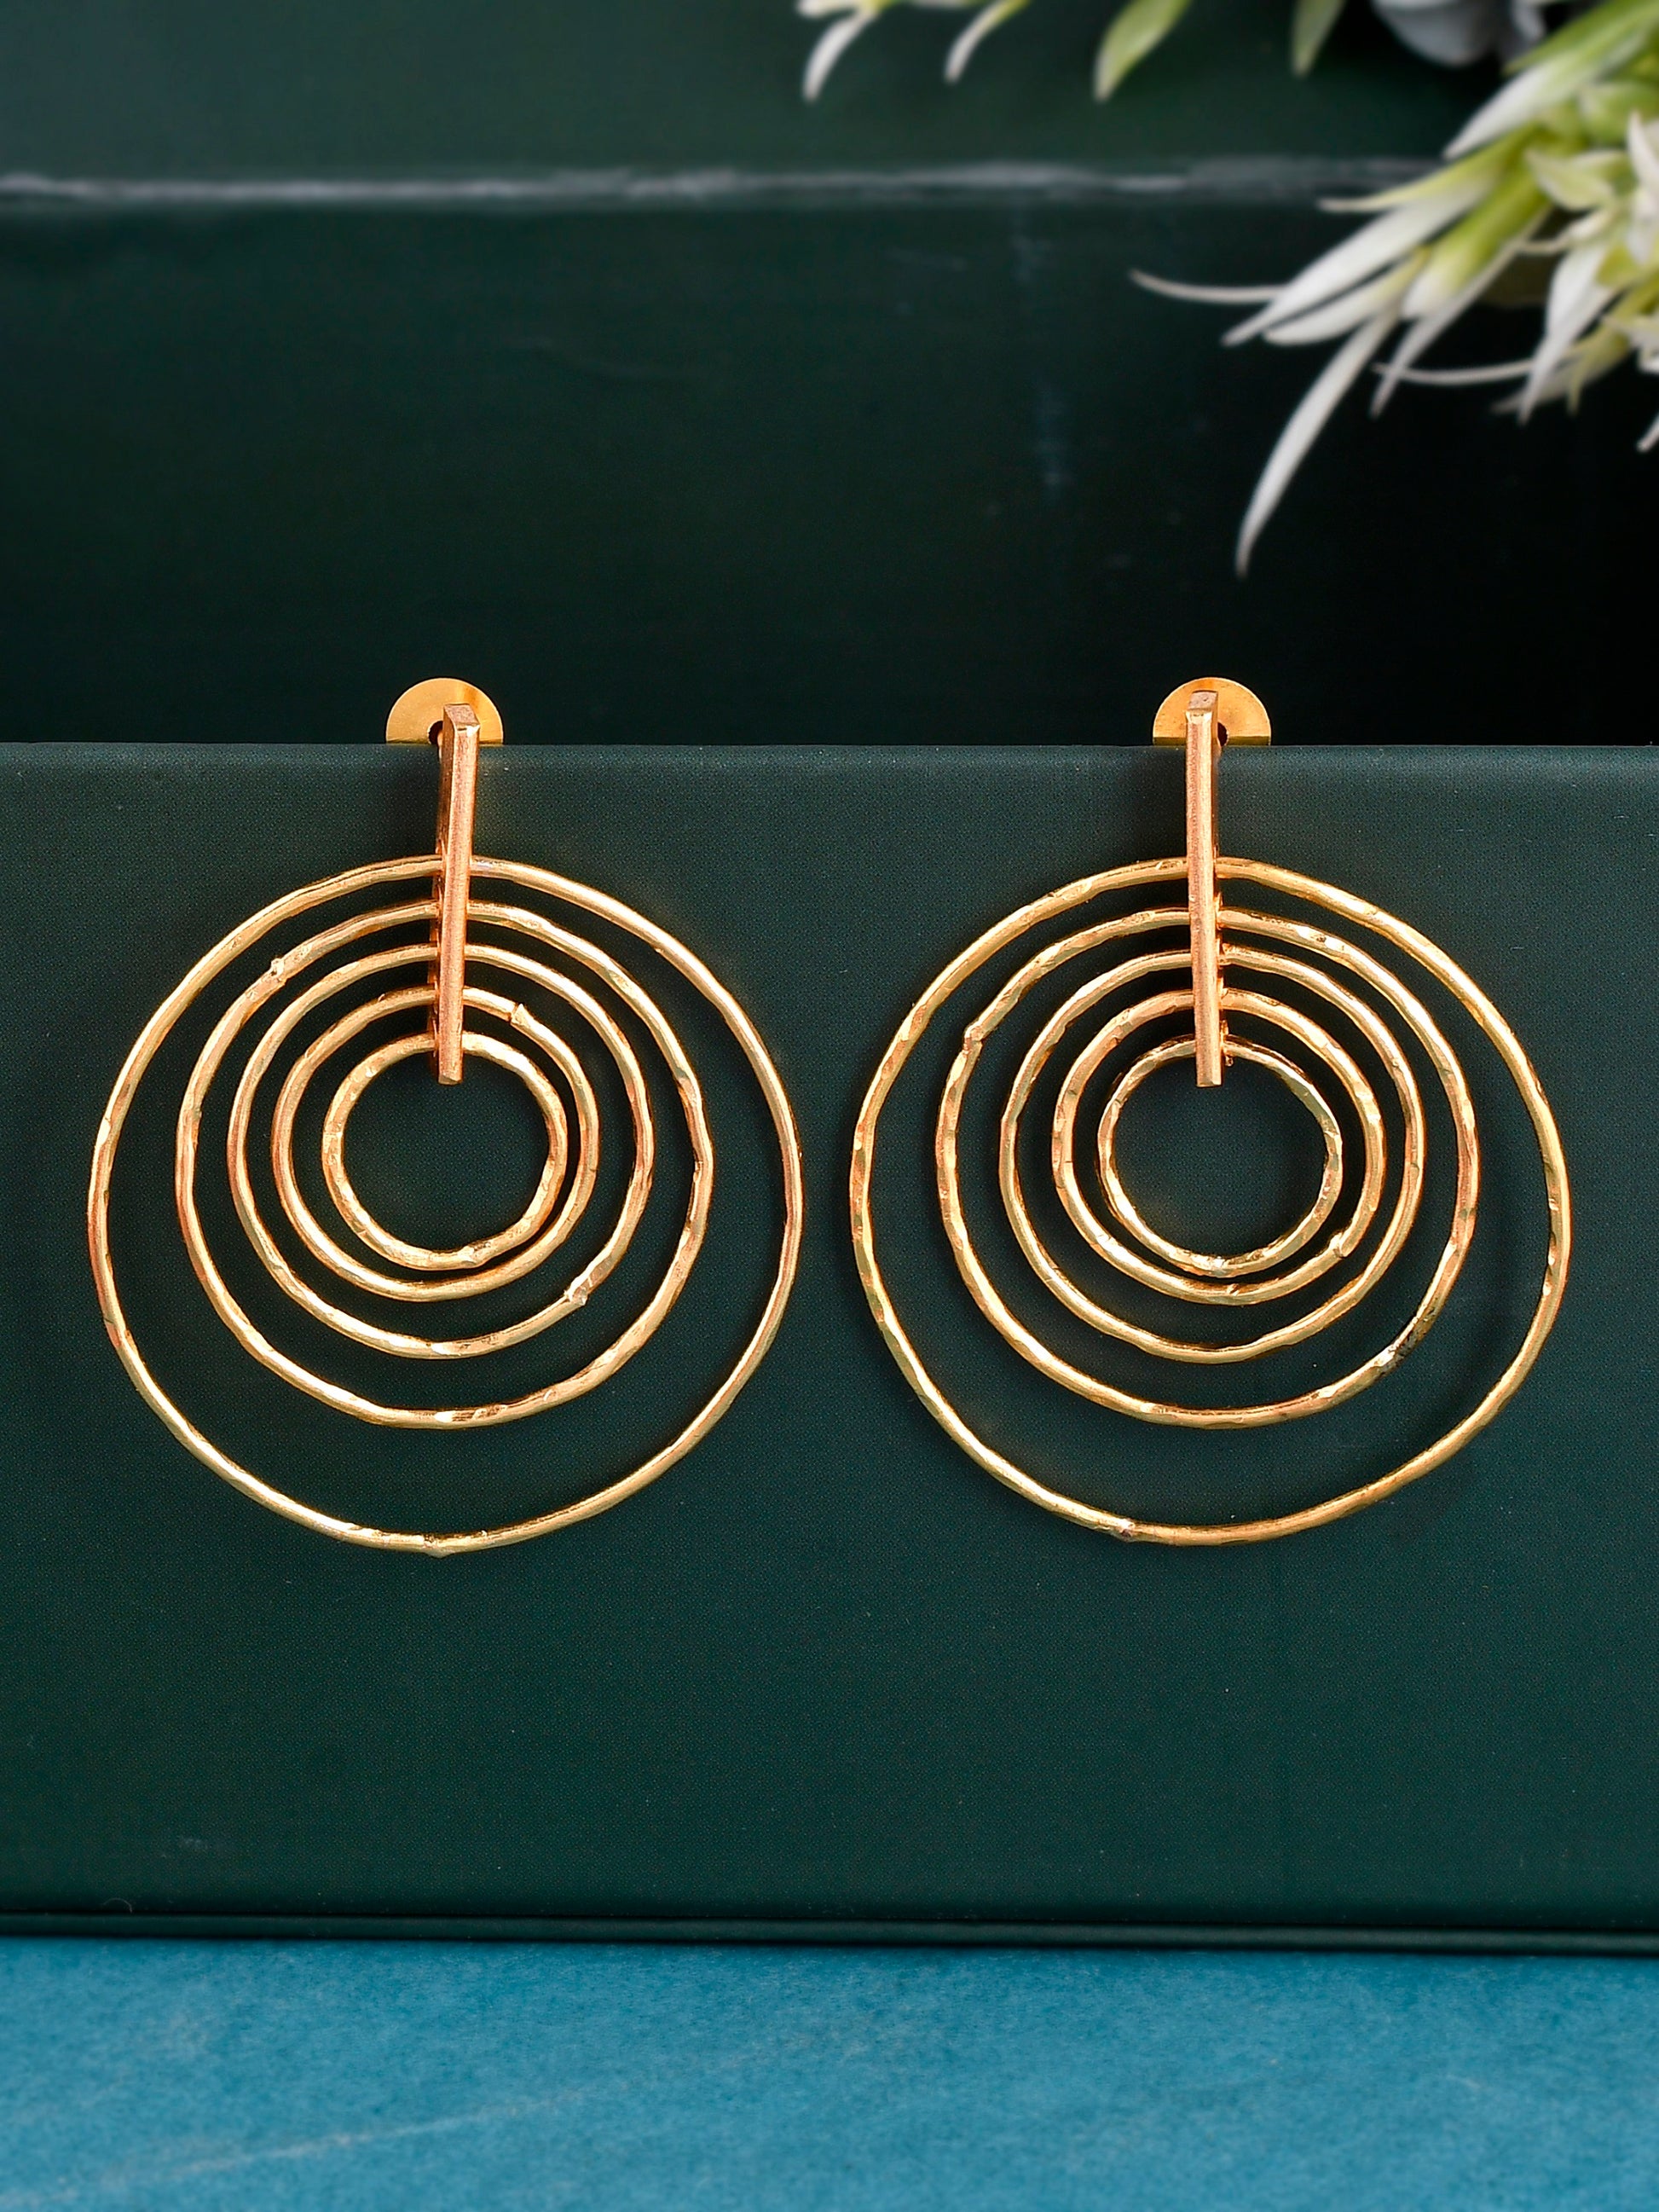 Gold-Plated Contemporary Drop Earrings